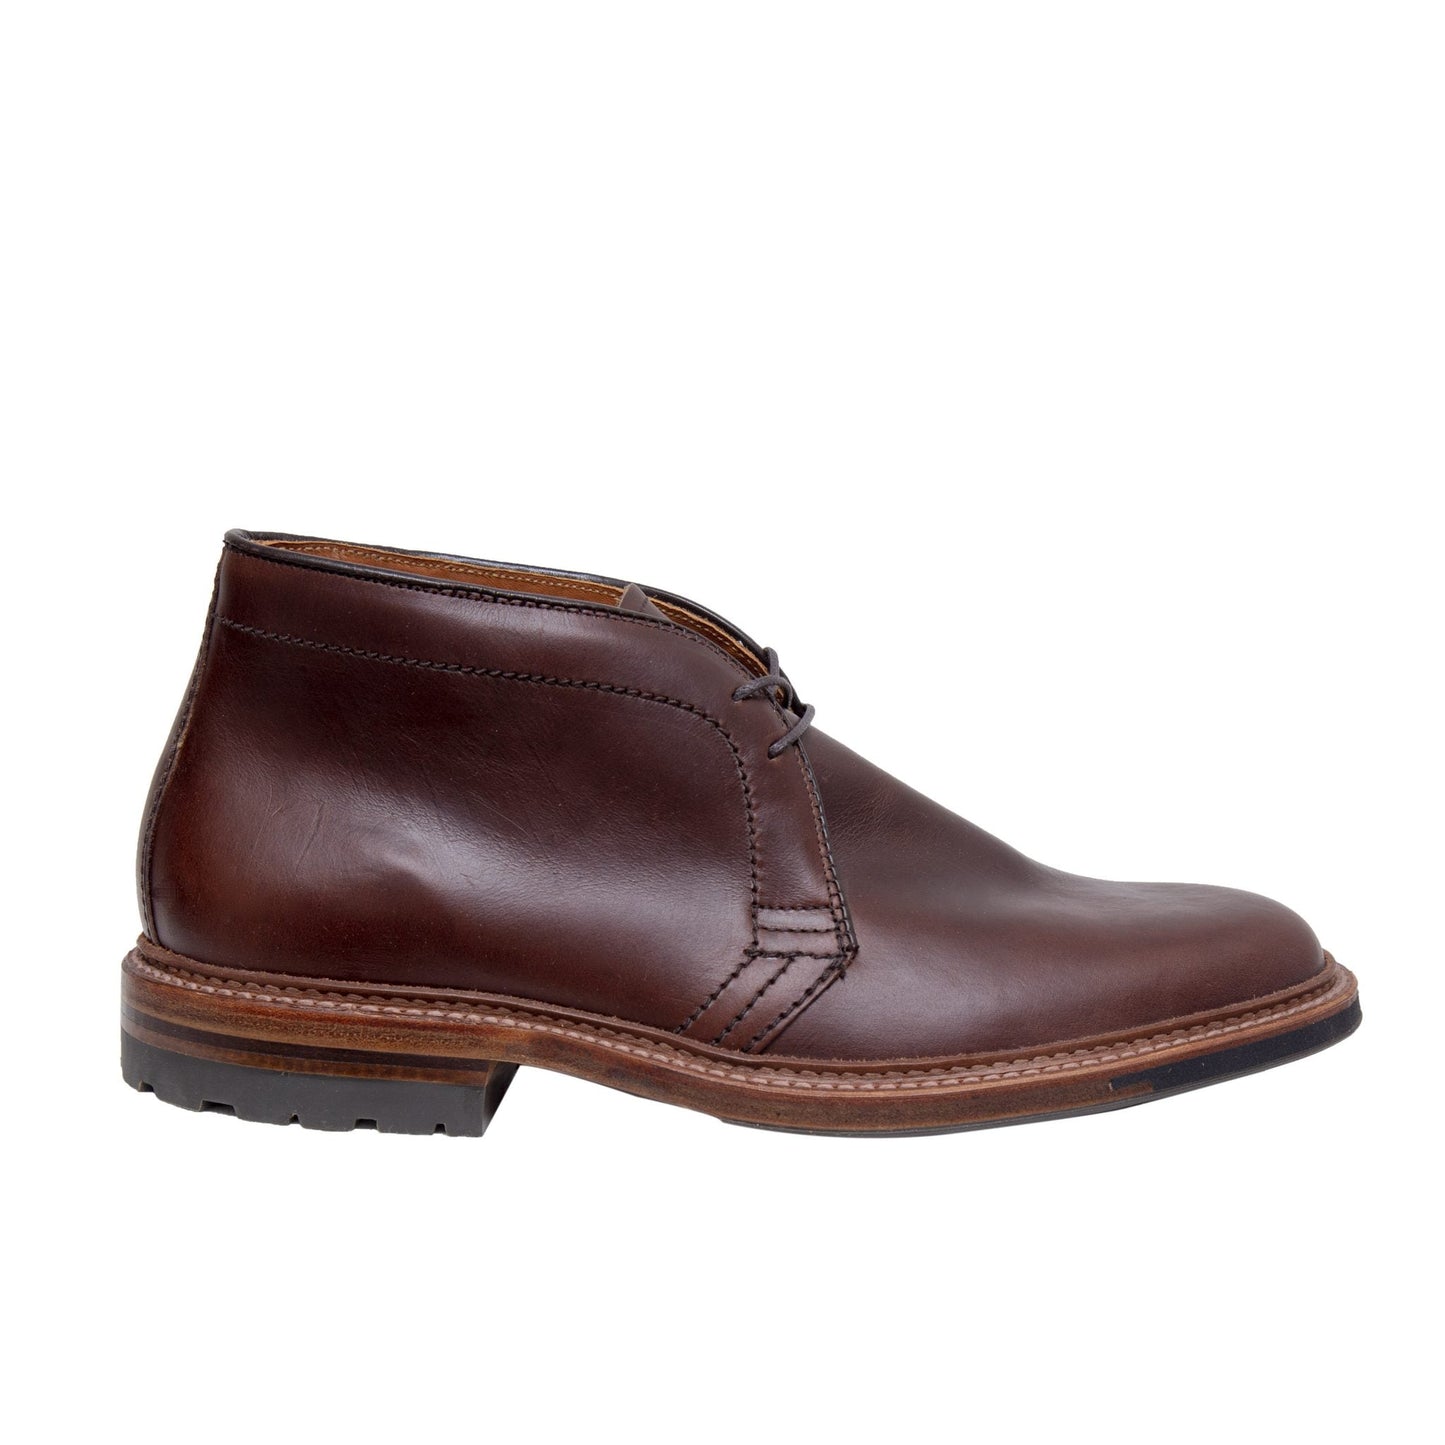 13781C - Chukka Boot in Brown Chromexcel